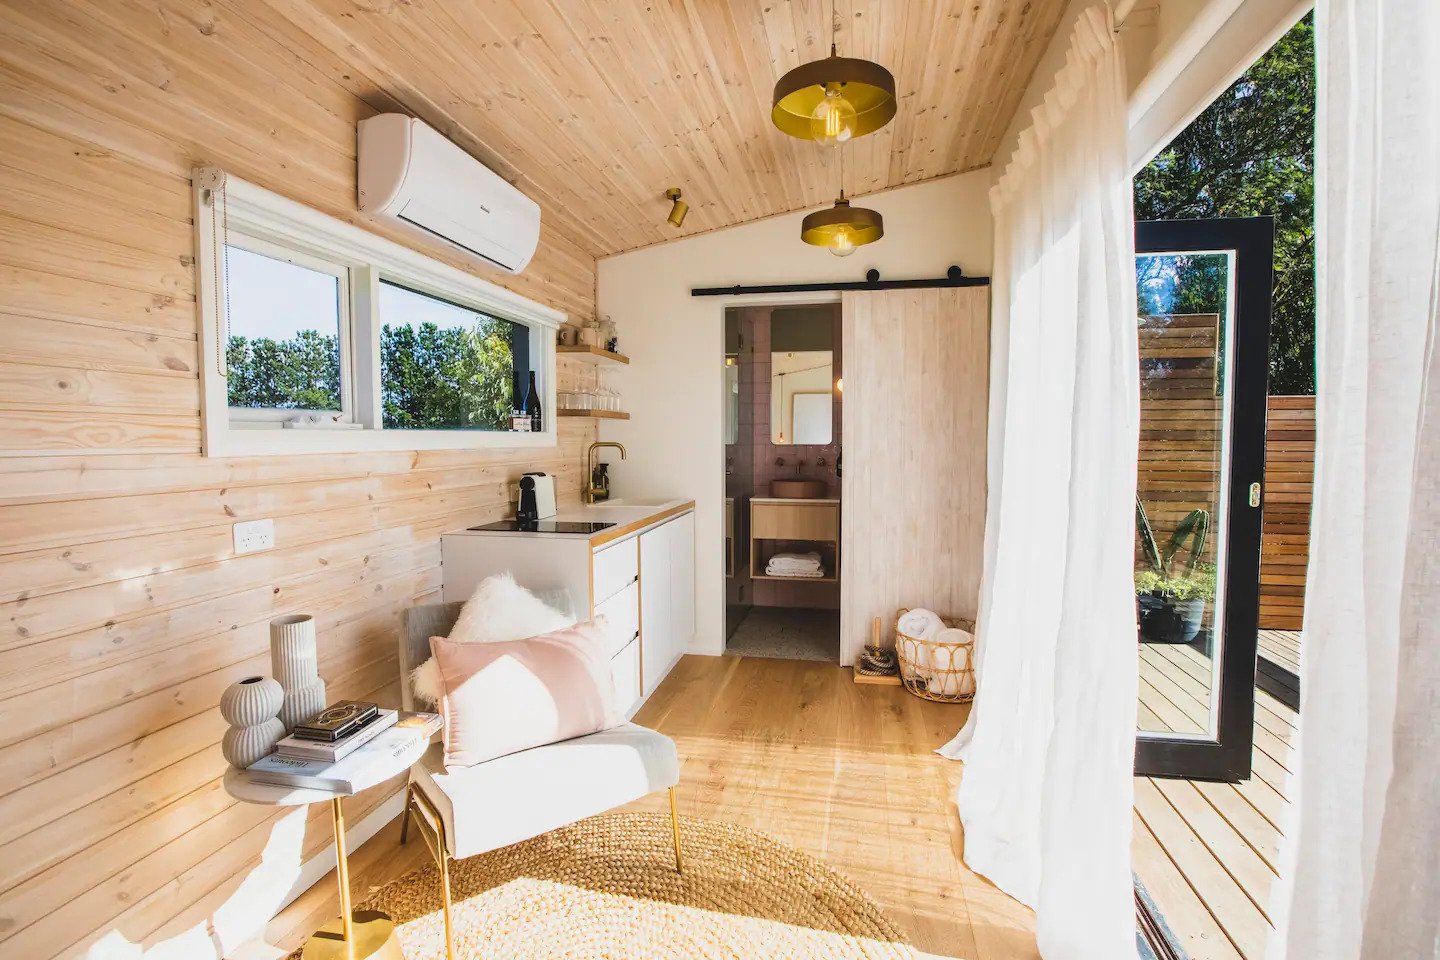 Hideout in Moss Vale is one of the best Airbnb cabins just outside of Sydney.